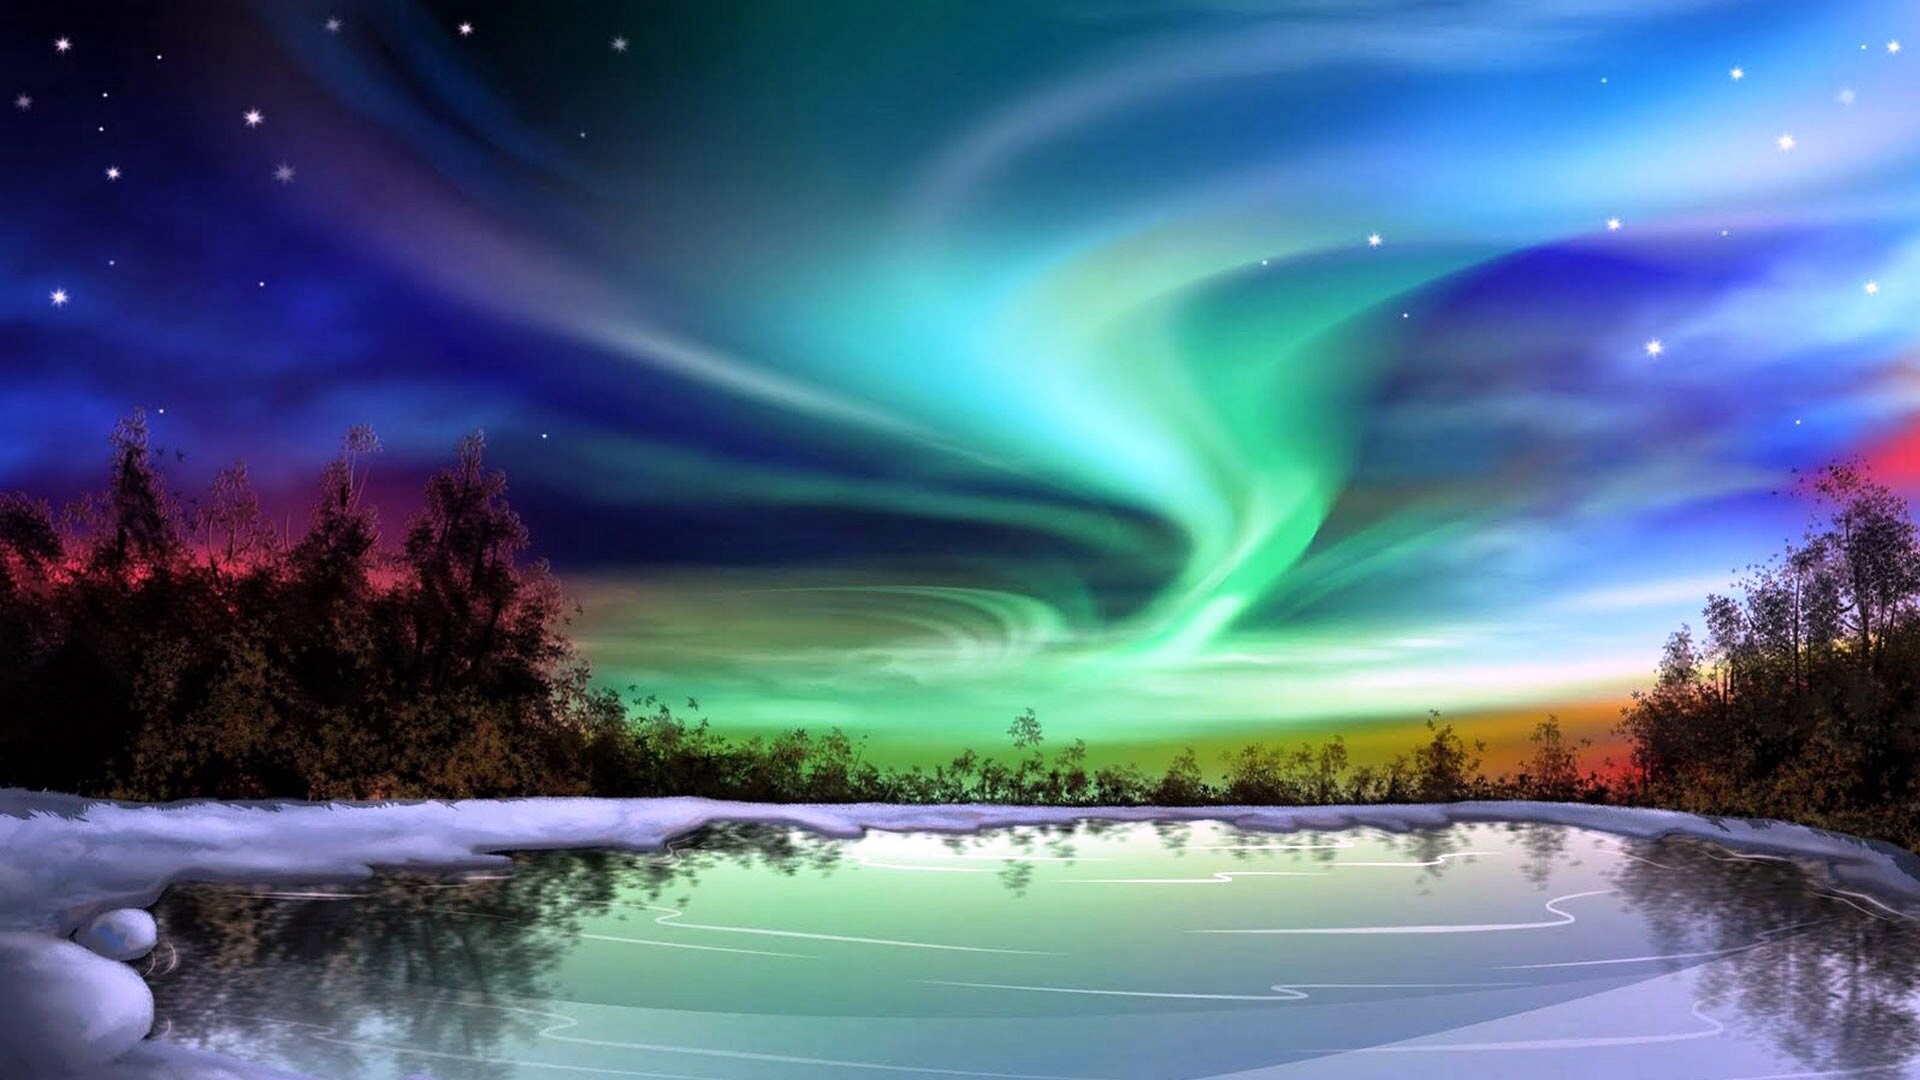 1920x1080 Aurora borealis images Northern lights HD wallpaper and background photos